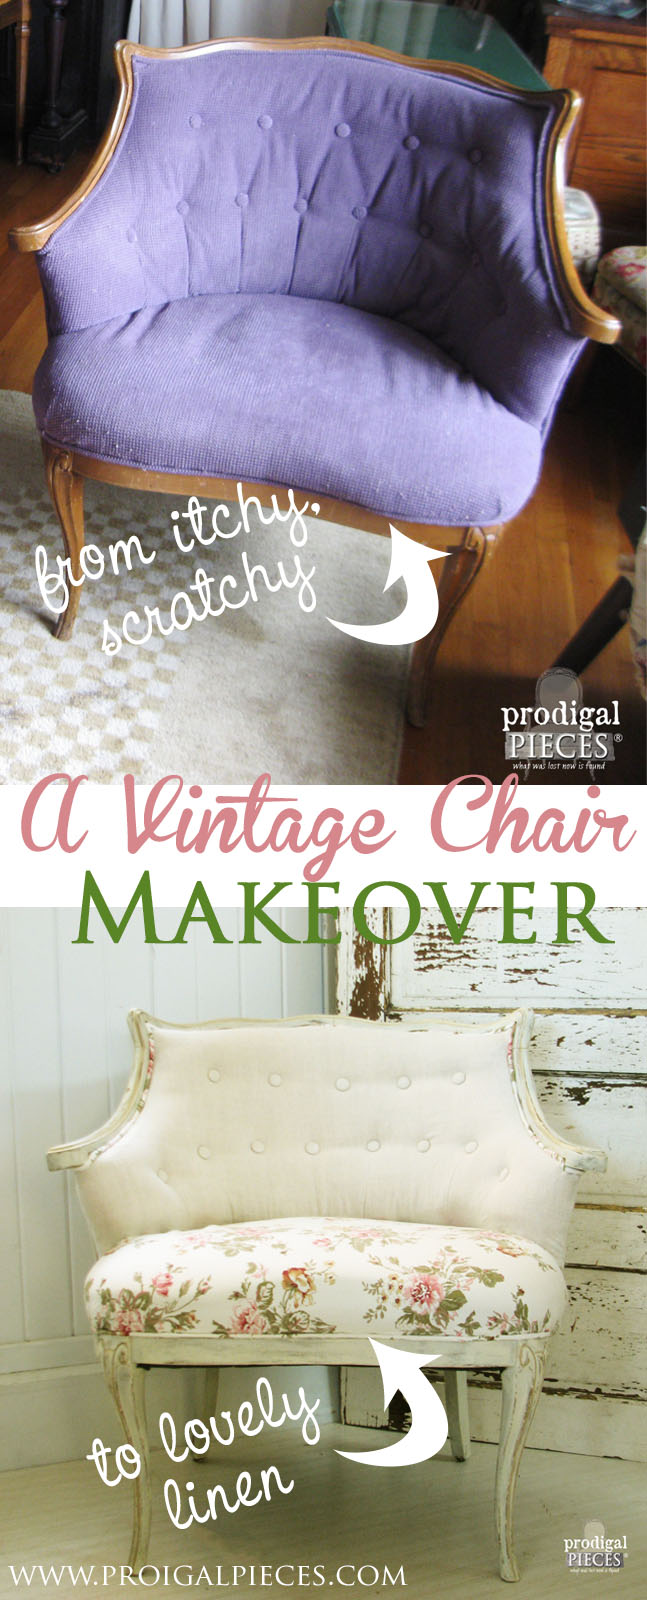 Outdated Upholstered Chair gets Linen & Rose French Makeover by Prodigal Pieces www.prodigalpieces.com